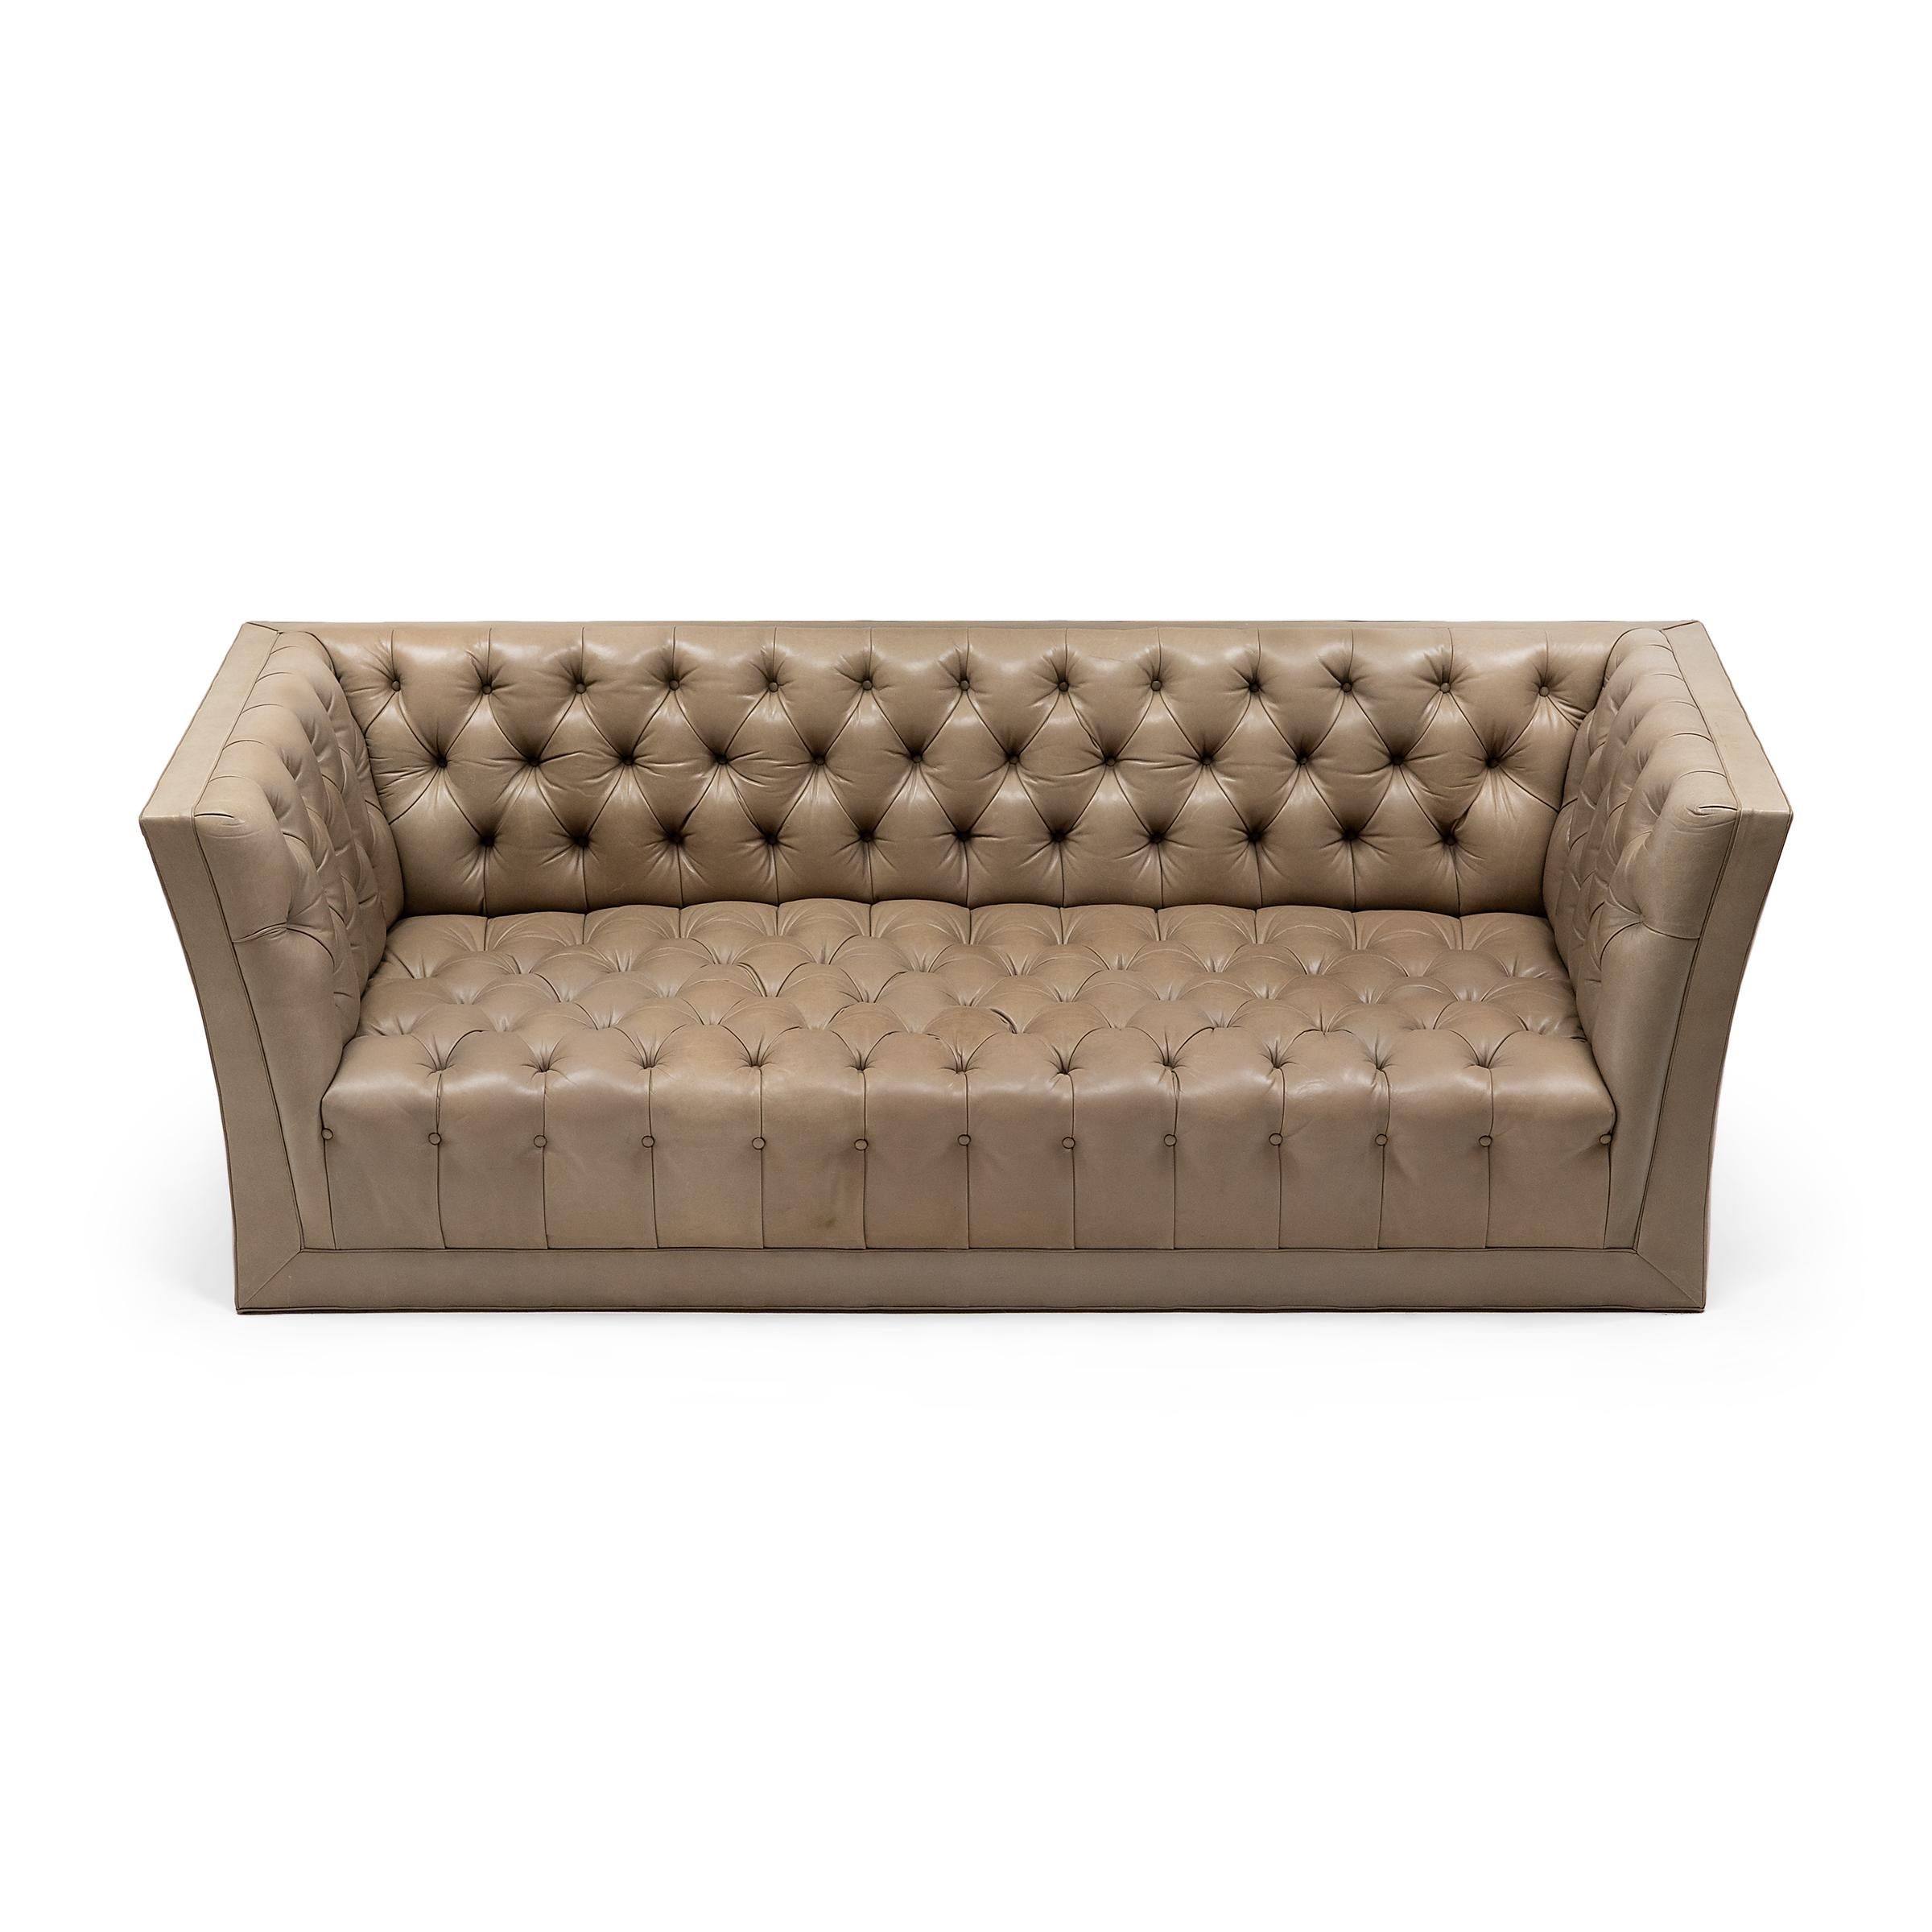 Modern Tufted Leather Sofa In Good Condition For Sale In Chicago, IL